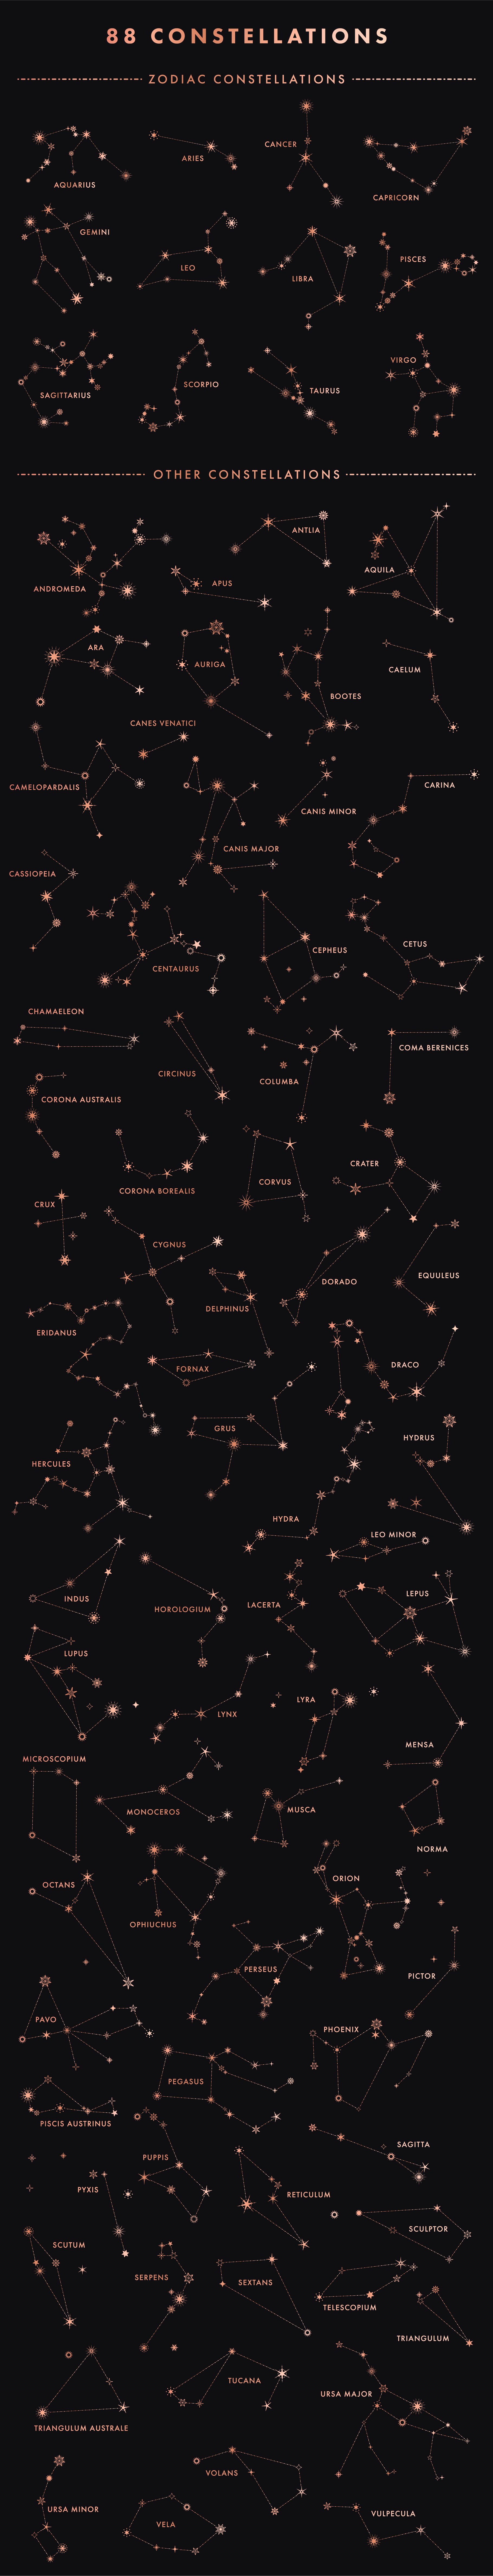 88 star constellations by megs lang prvw 009 507